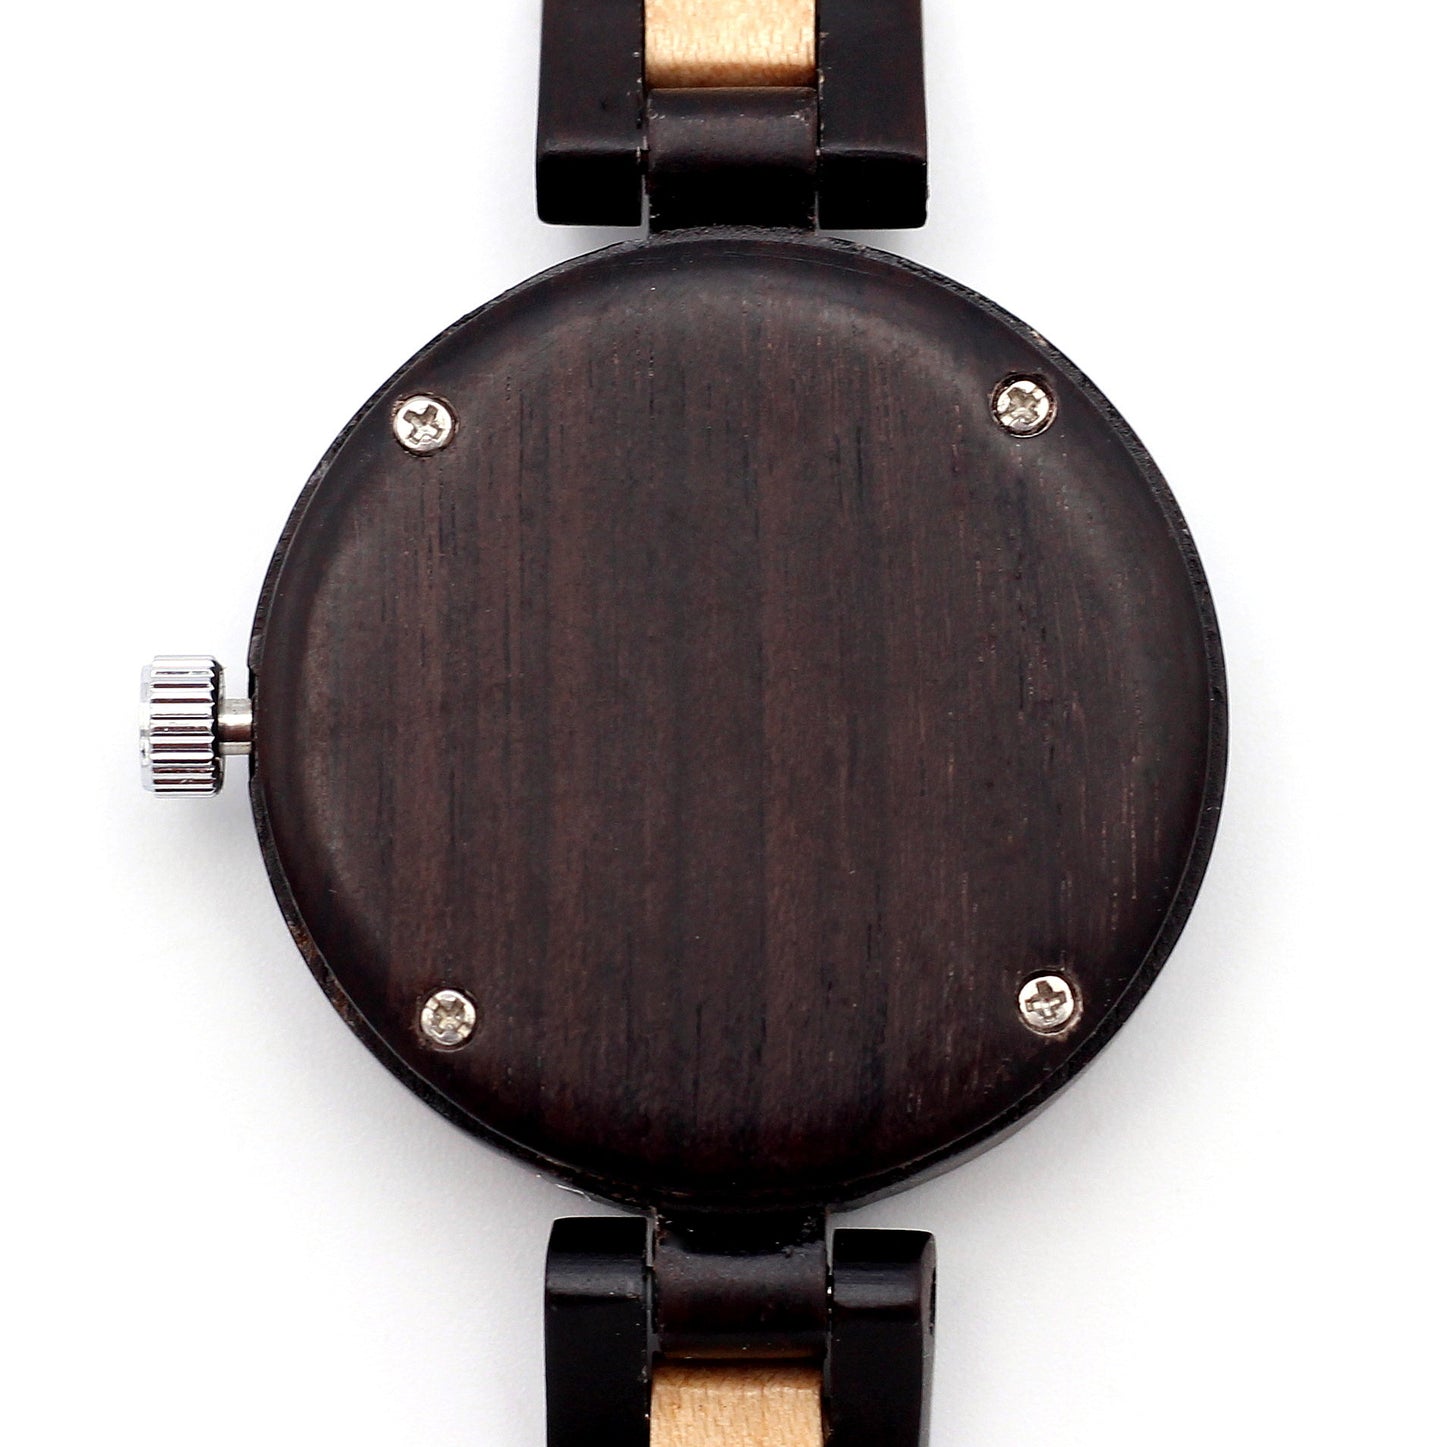 MISSDATE VERNE BLACK Ladies Solid Wooden Watch with DATE function - Hashtag Bamboo